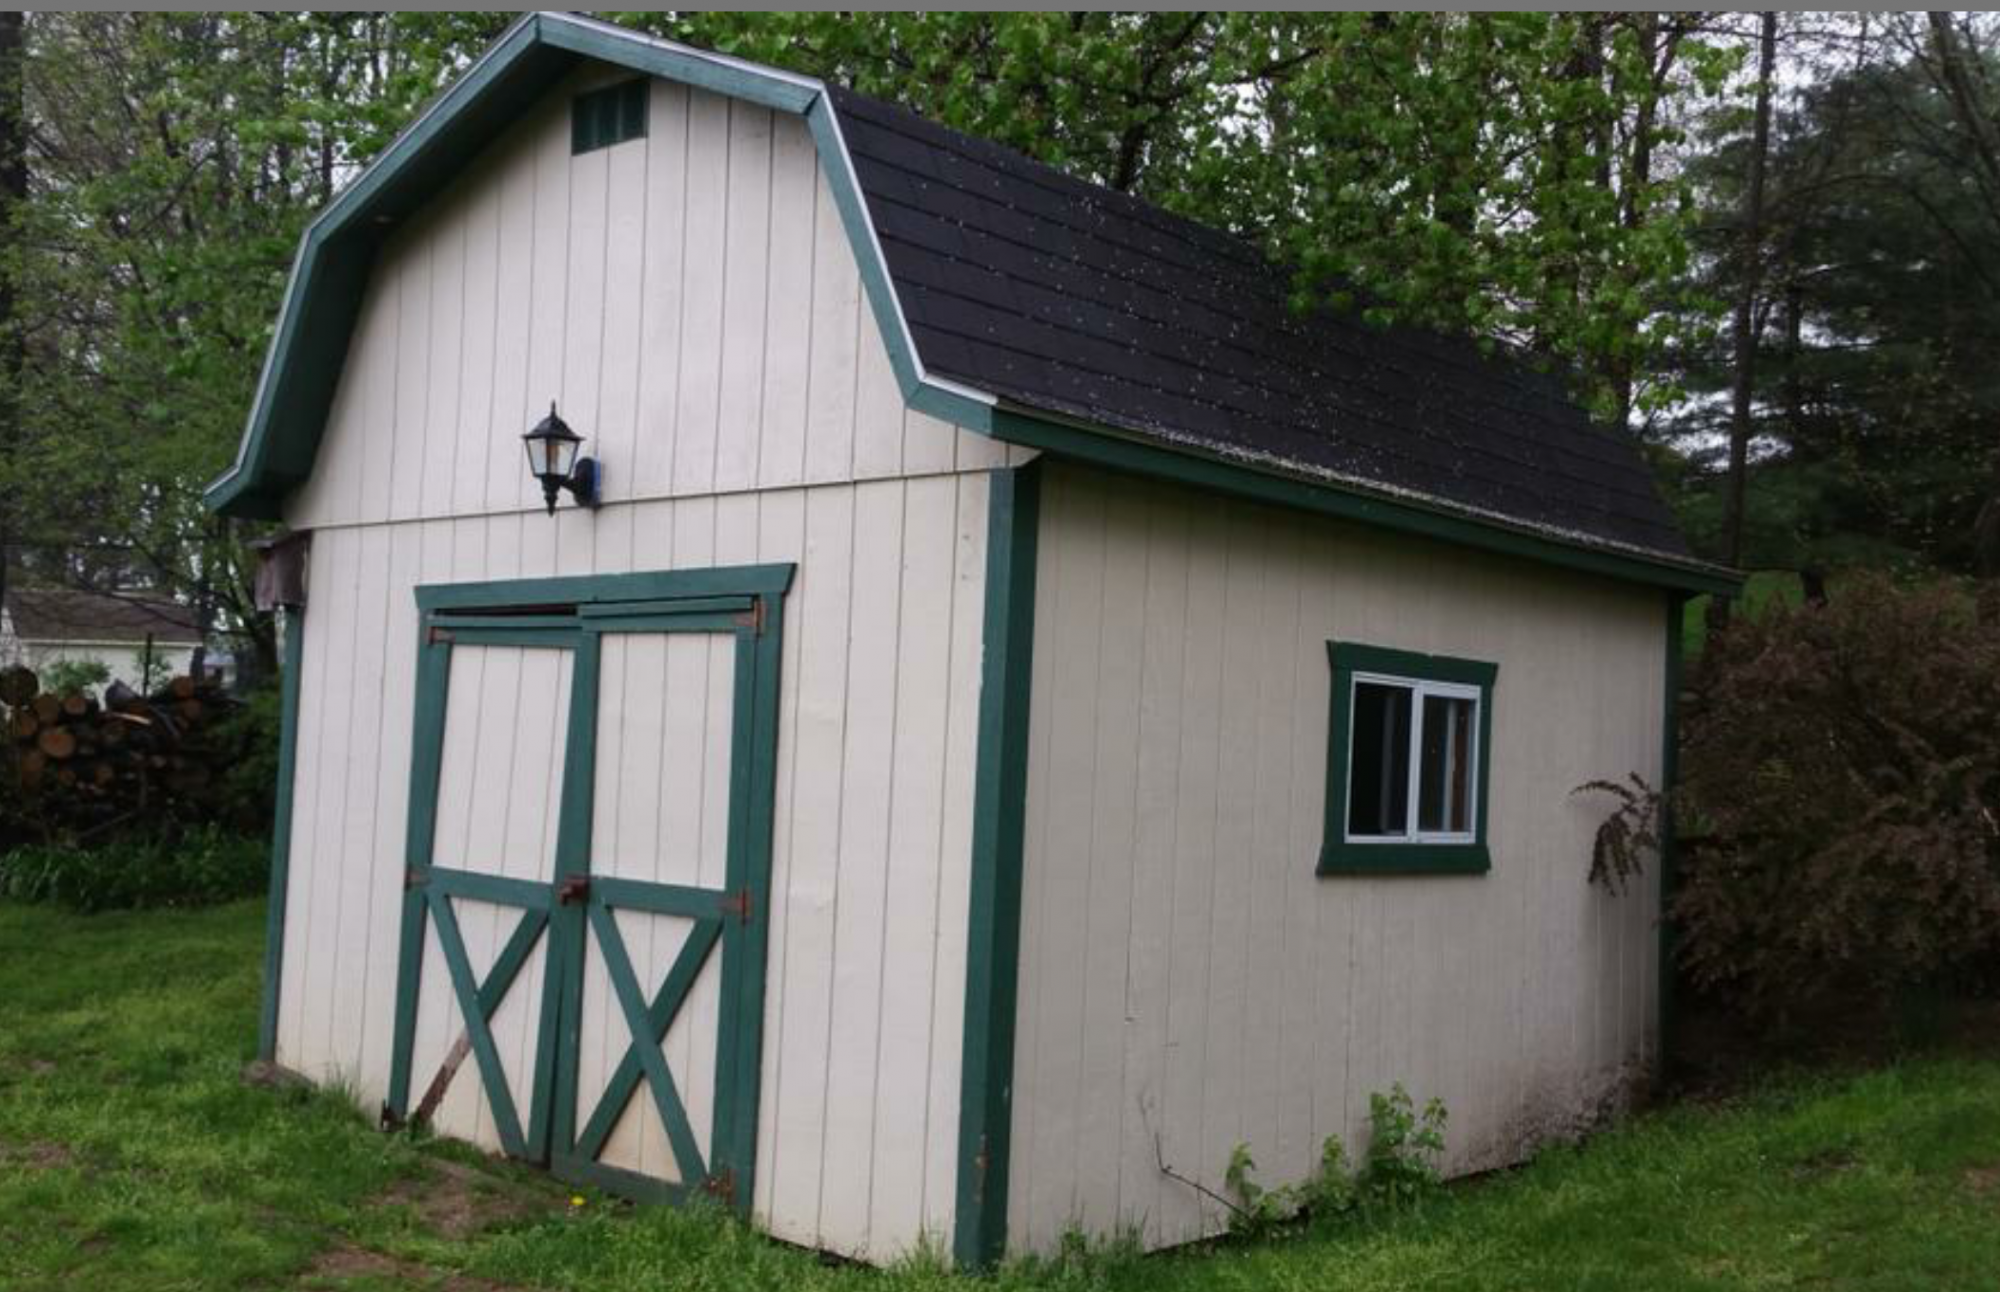 Miller Storage Barns in Ohio will buy back your old shed or storage barn and haul it away at no charge to you! Find out more